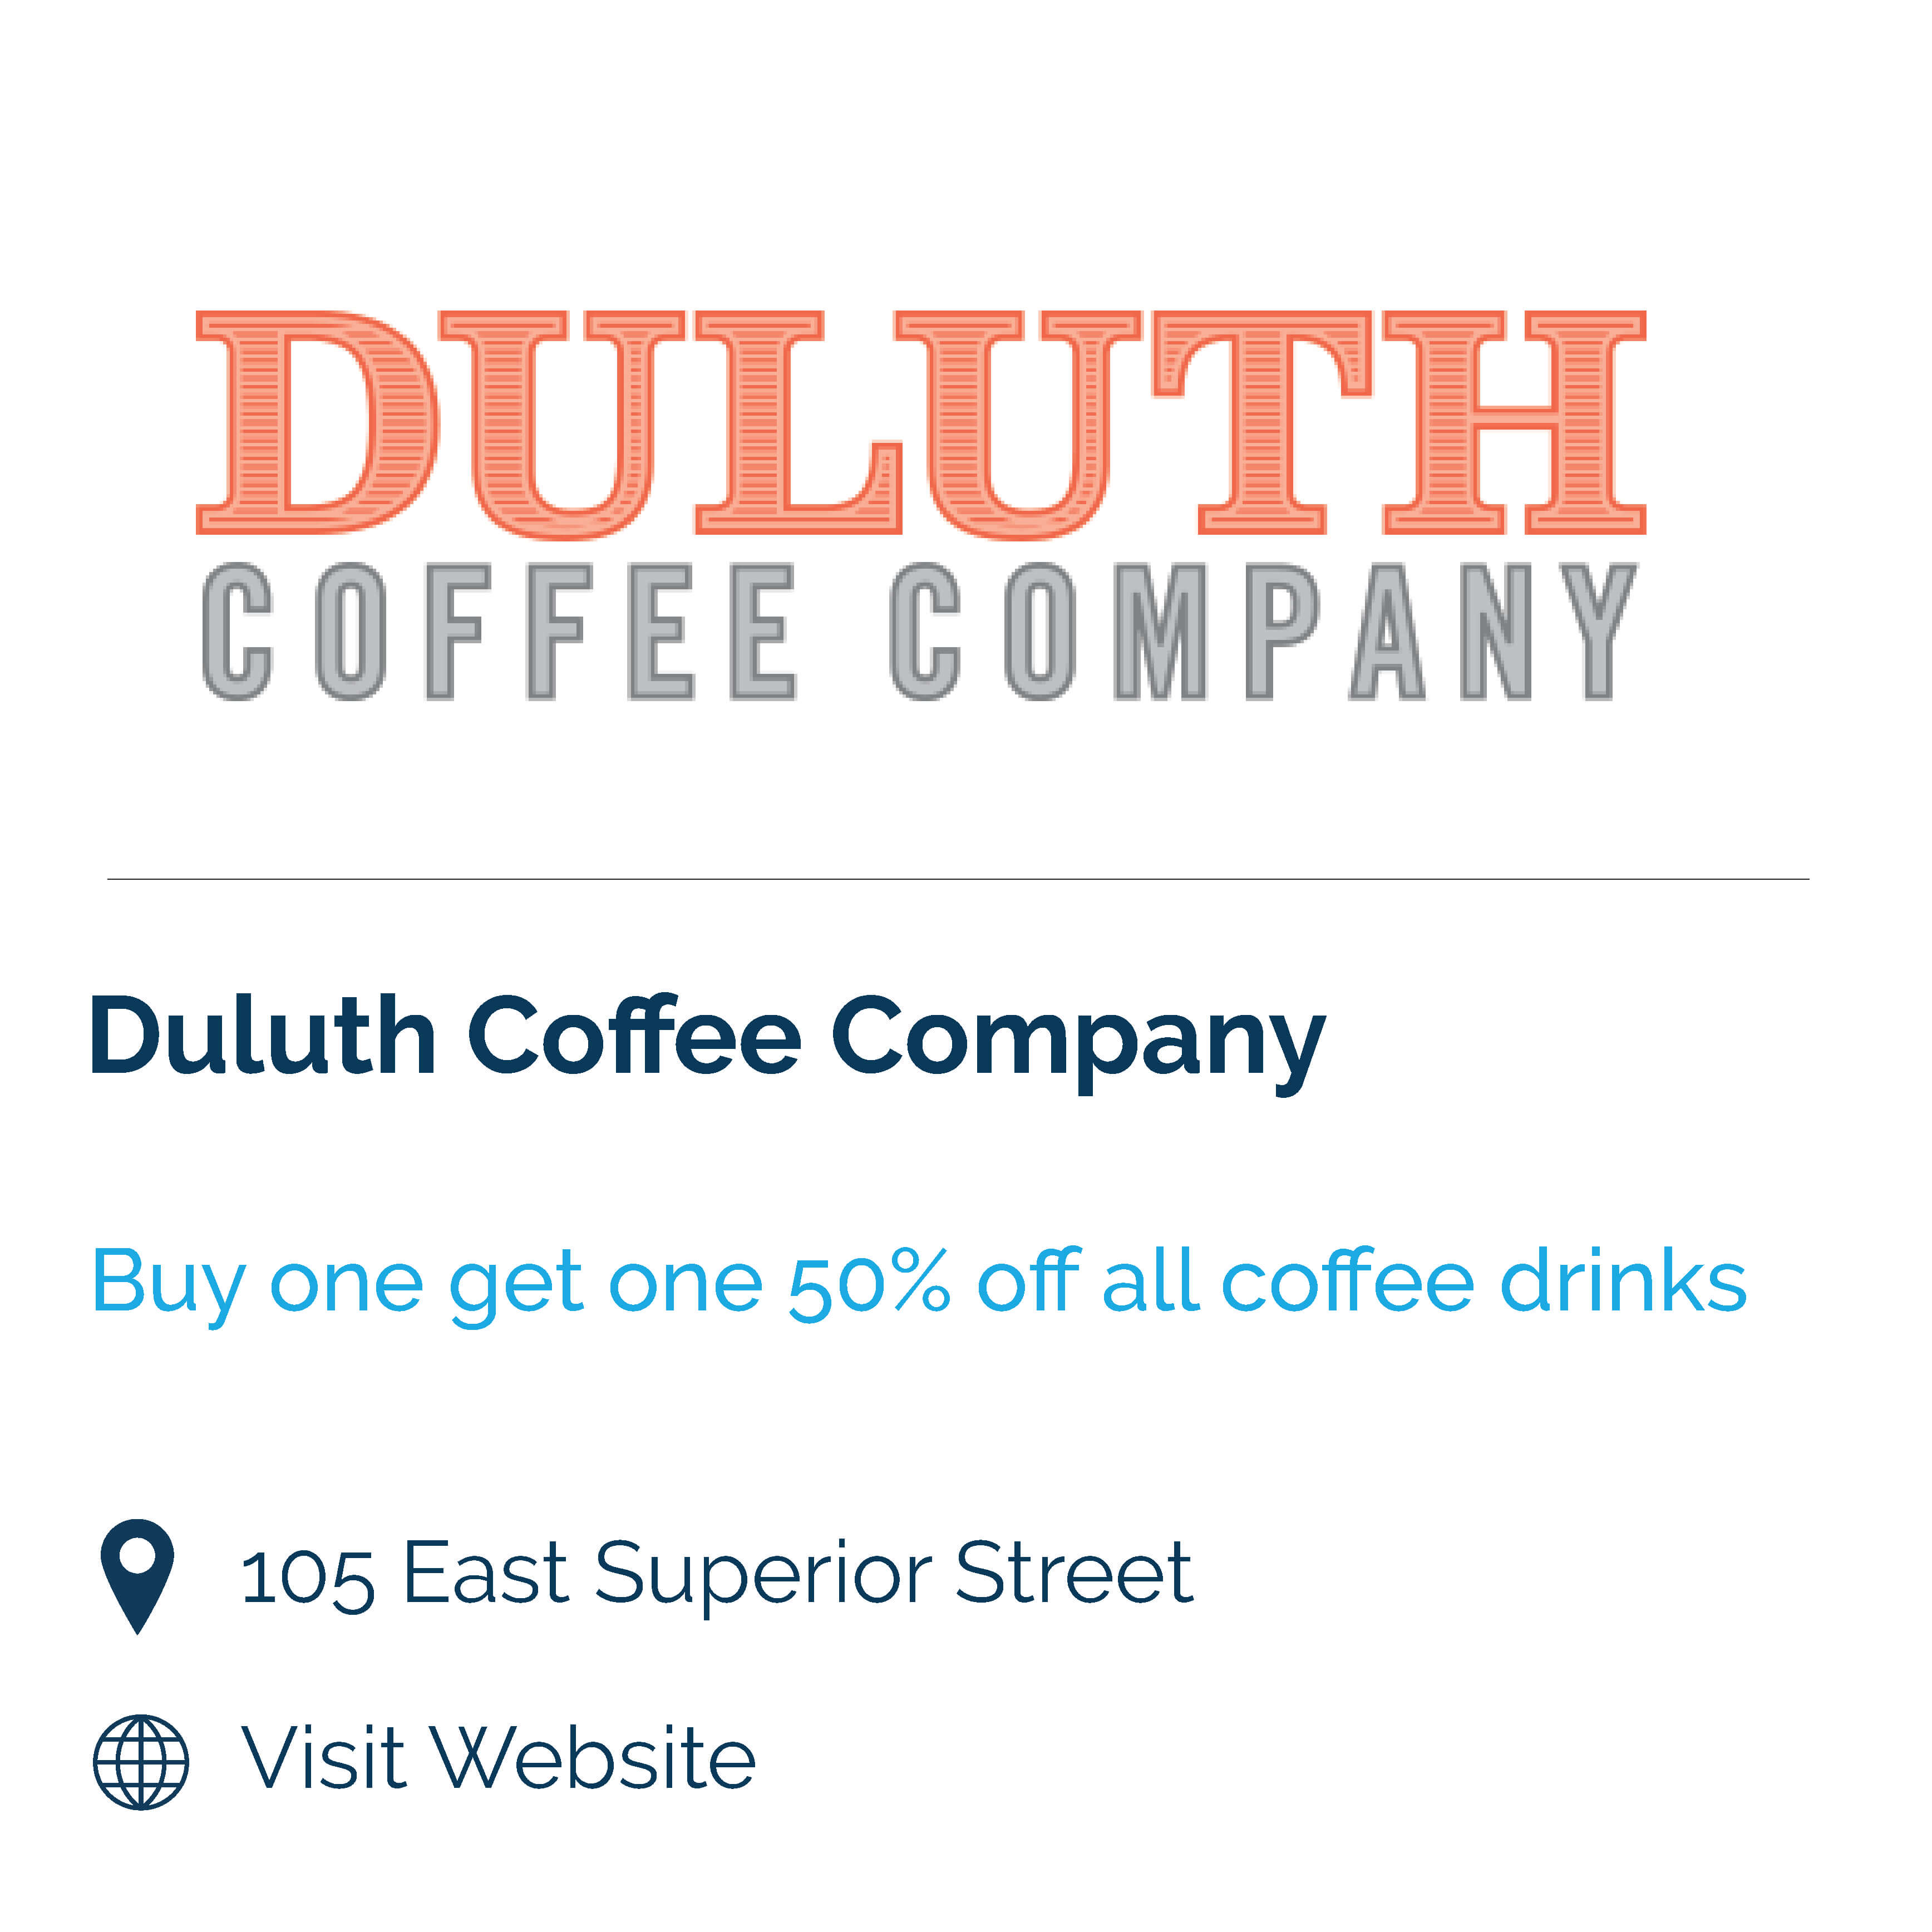 duluth coffee company. buy one get one 50% off all coffee drinks. 105 east superior street